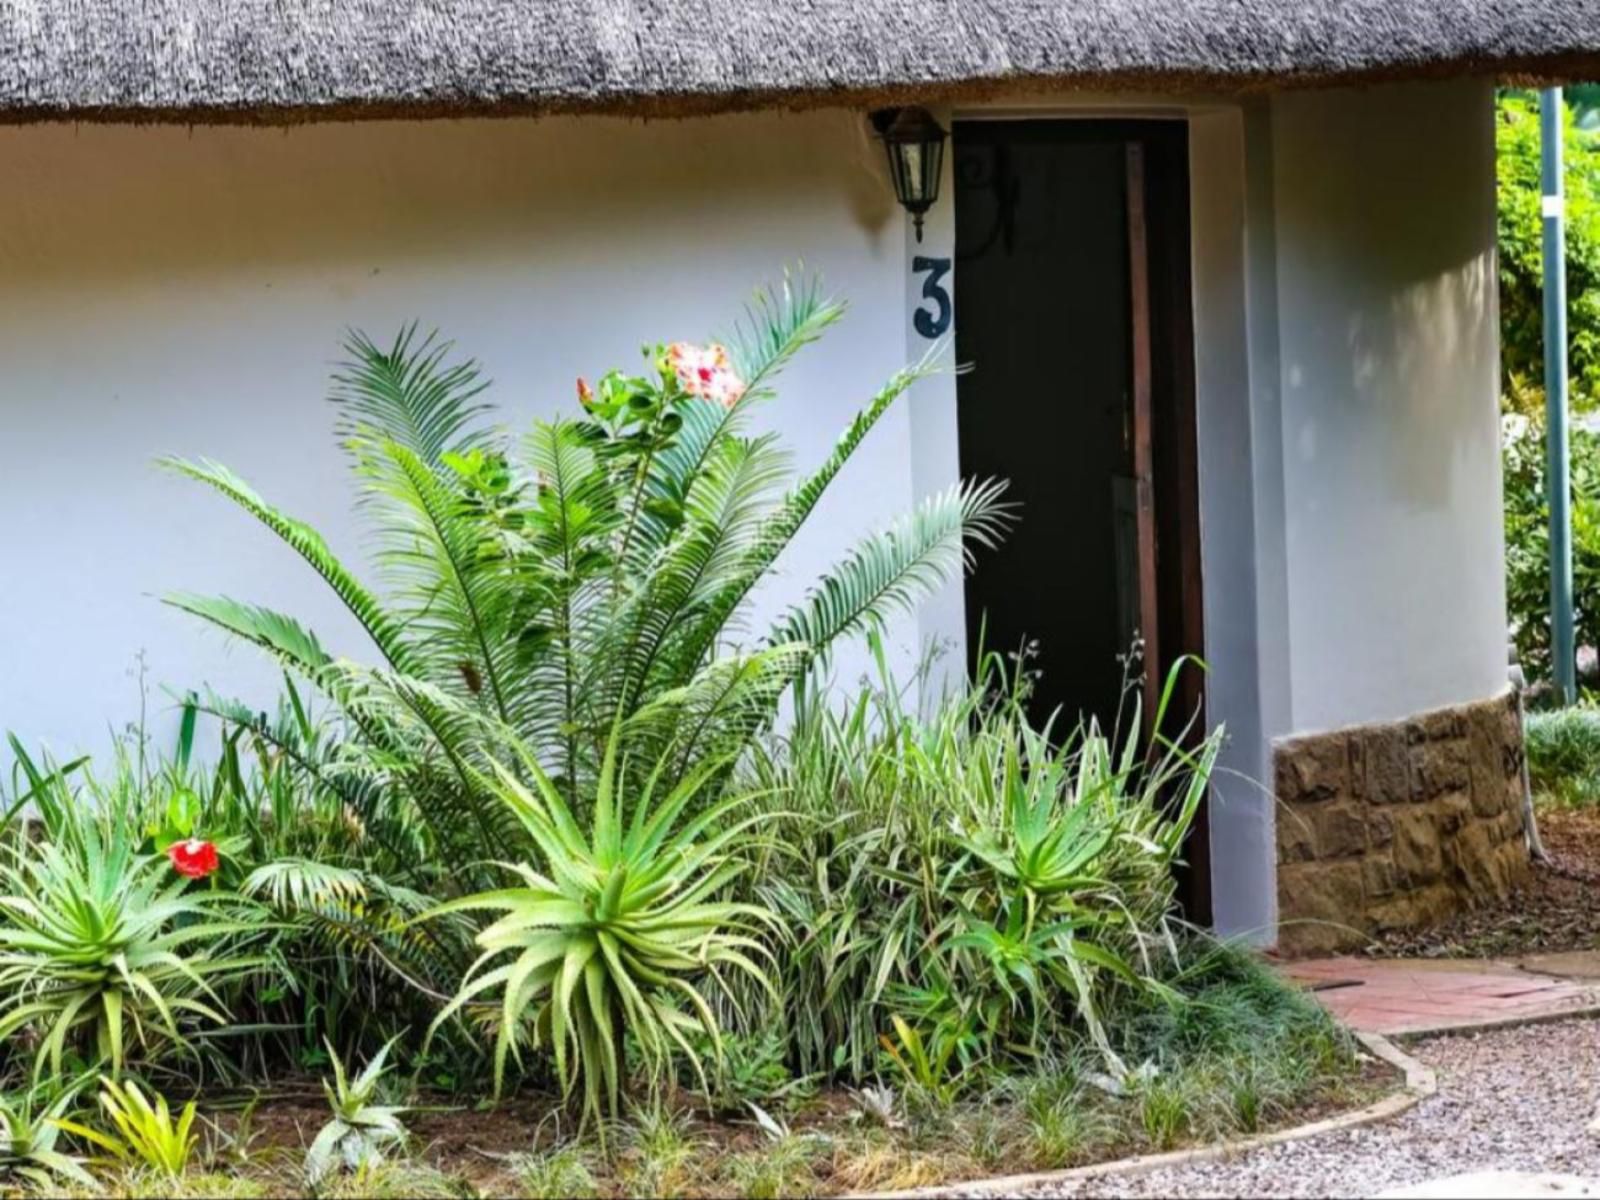 Sibsons House Hillcrest Durban Kwazulu Natal South Africa Palm Tree, Plant, Nature, Wood